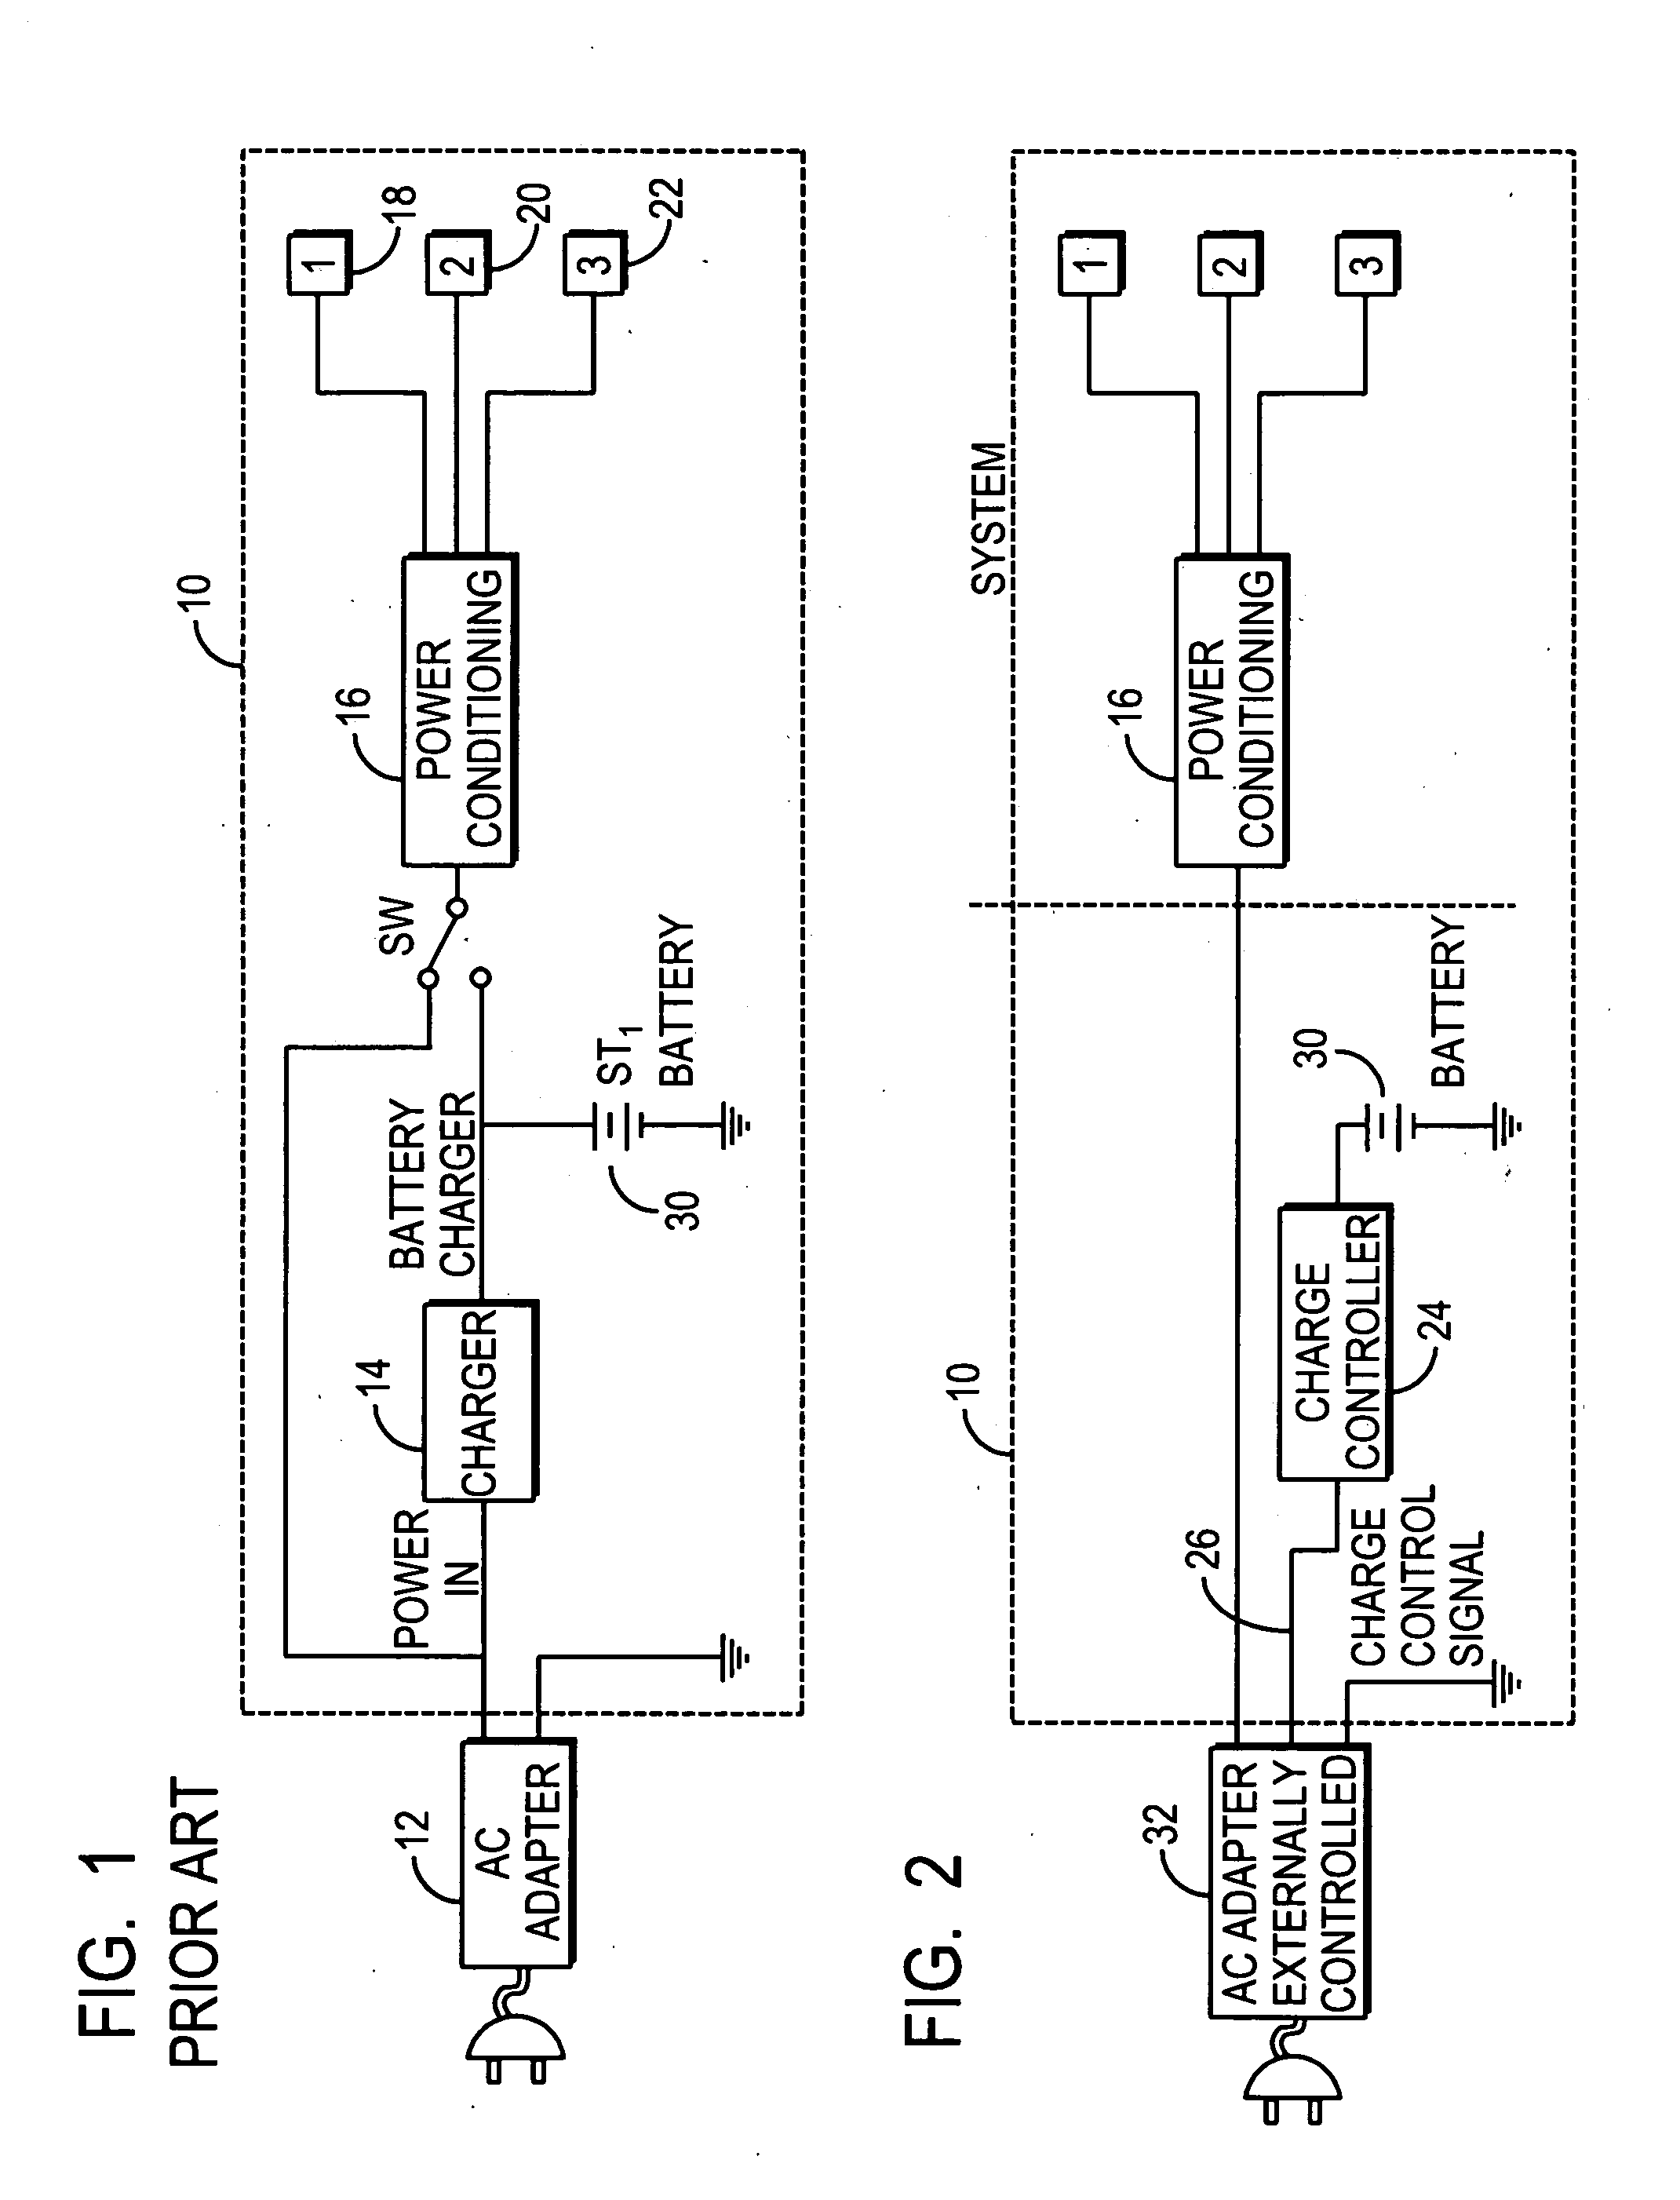 Power management for battery powered appliances